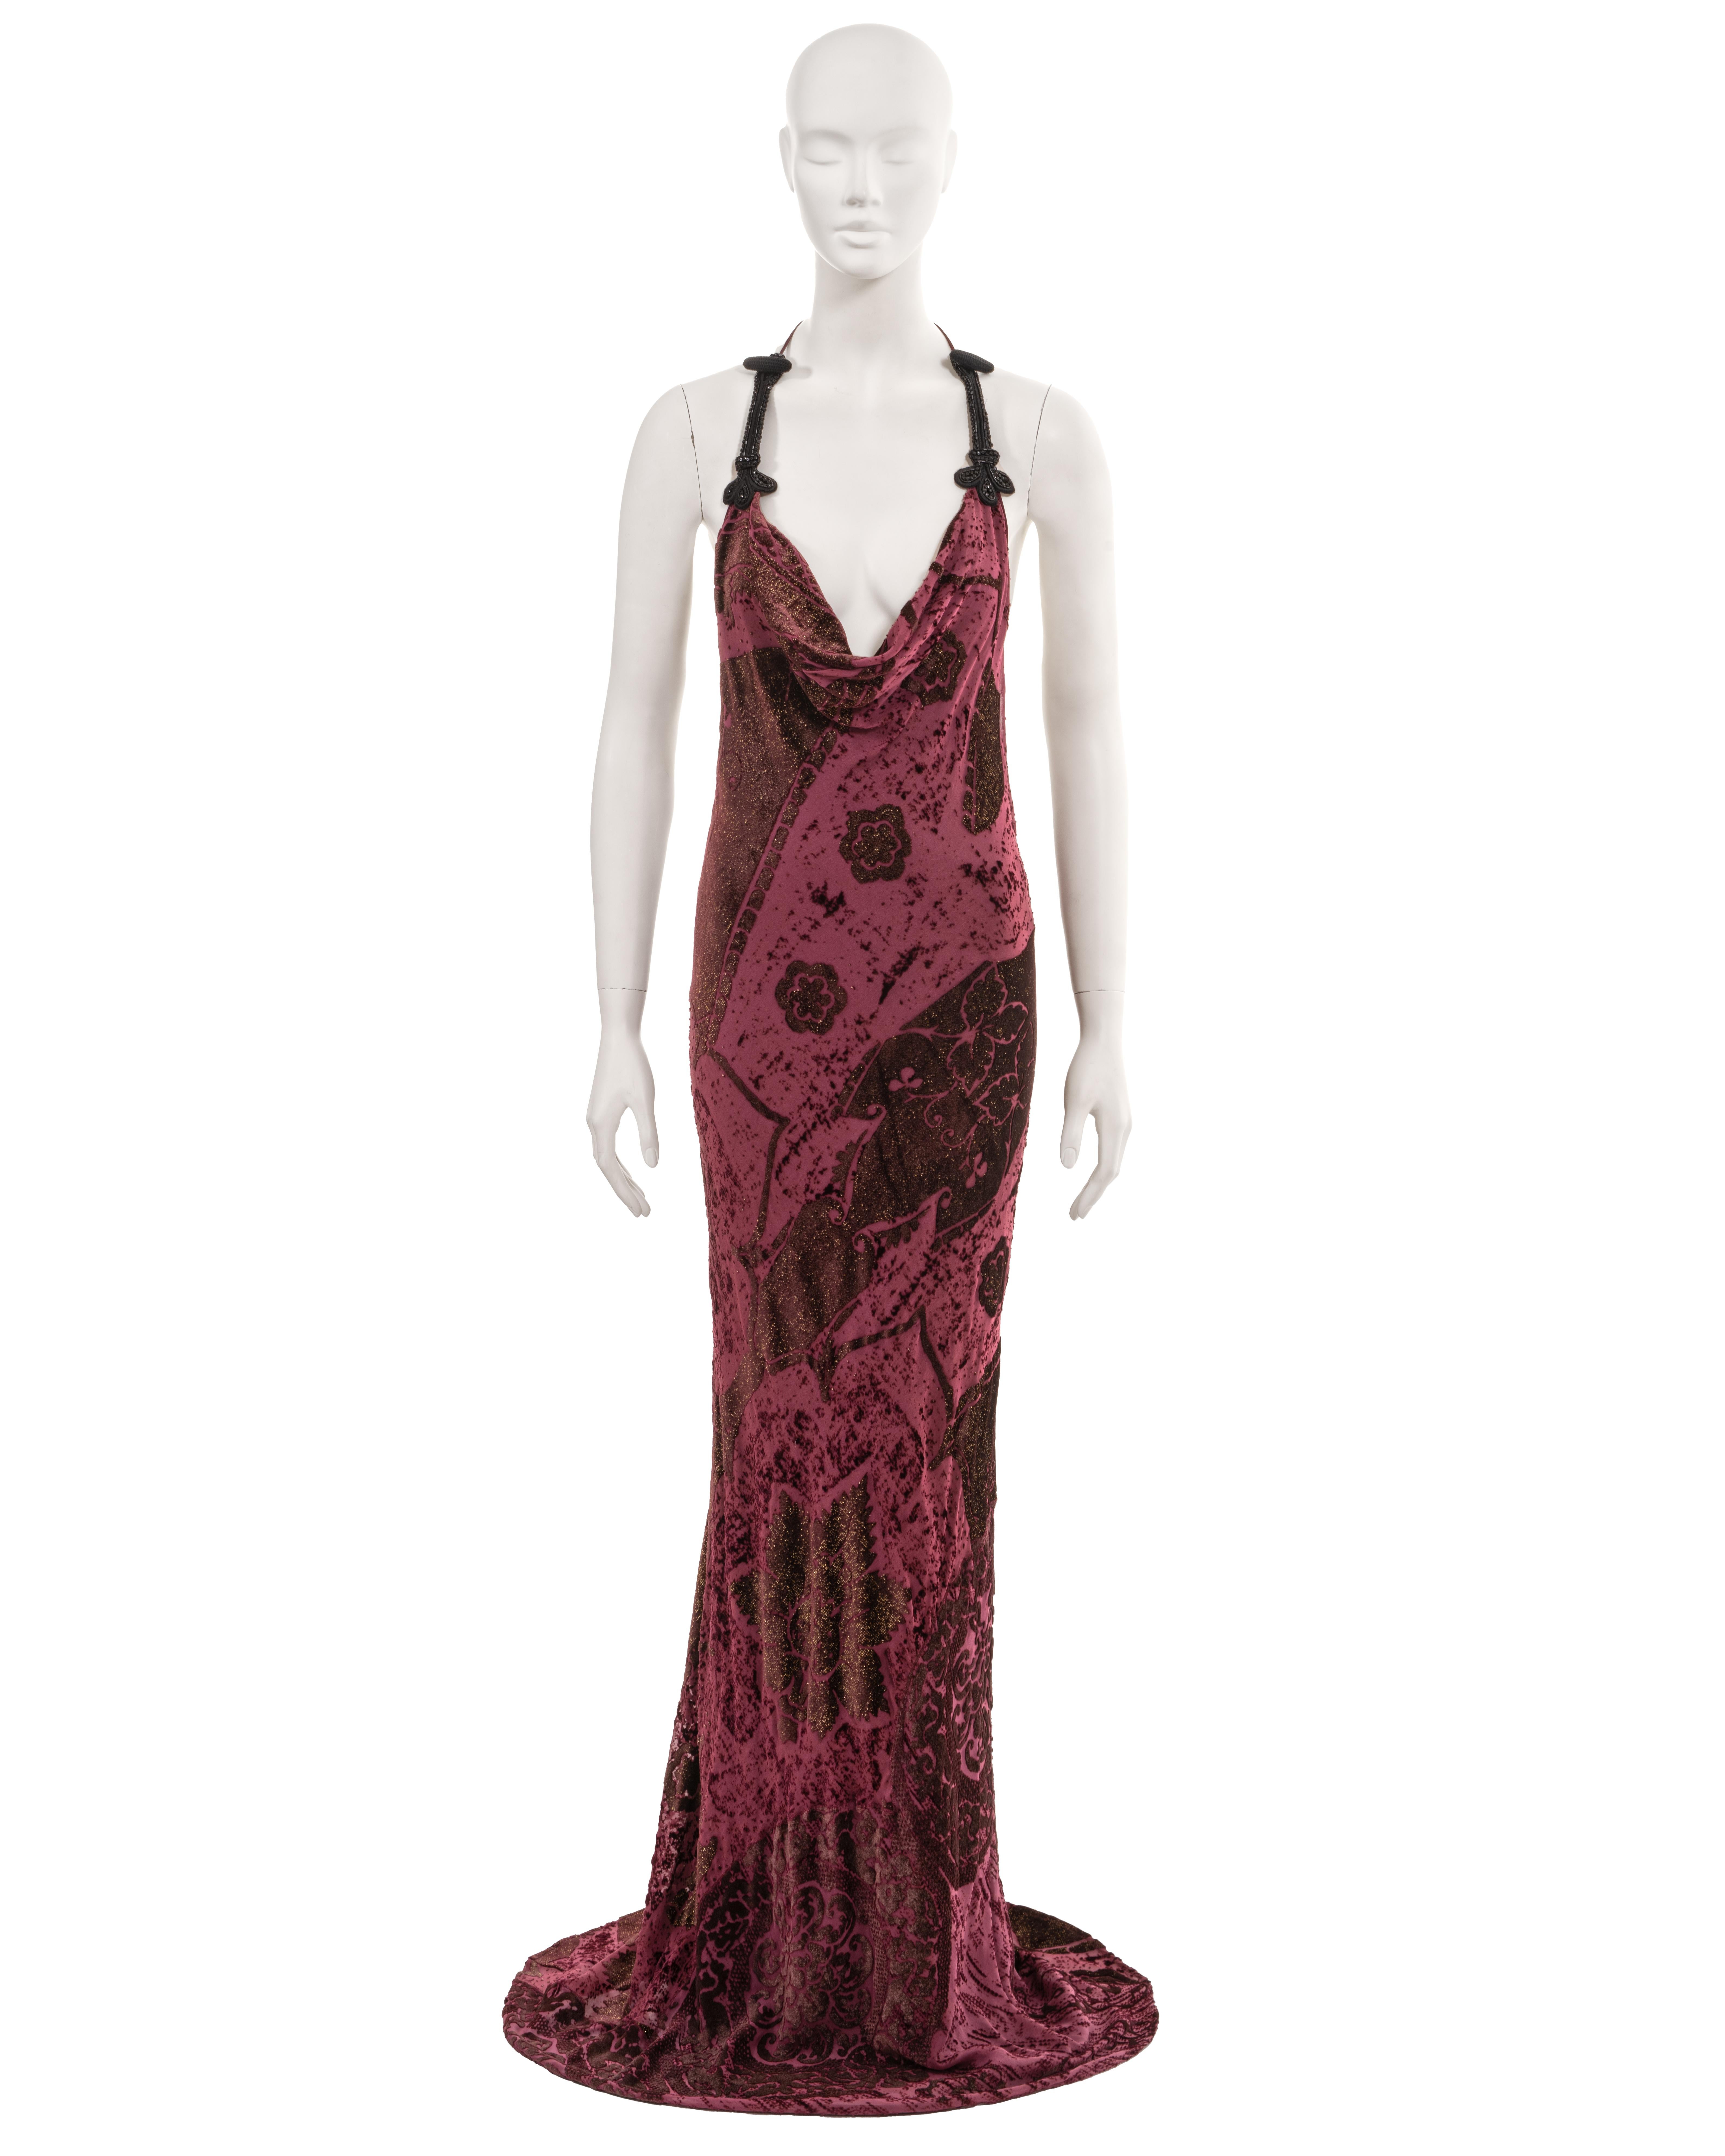 ▪ Roberto Cavalli halter neck evening dress
▪ Fall-Winter 2004
▪ Sold by One of a Kind Archive
▪ Burgundy silk-rayon cut-velvet with metallic gold flecking
▪ Plunging cowl neck 
▪ Halterneck string ties with decorative beaded frog-fastening detail
▪